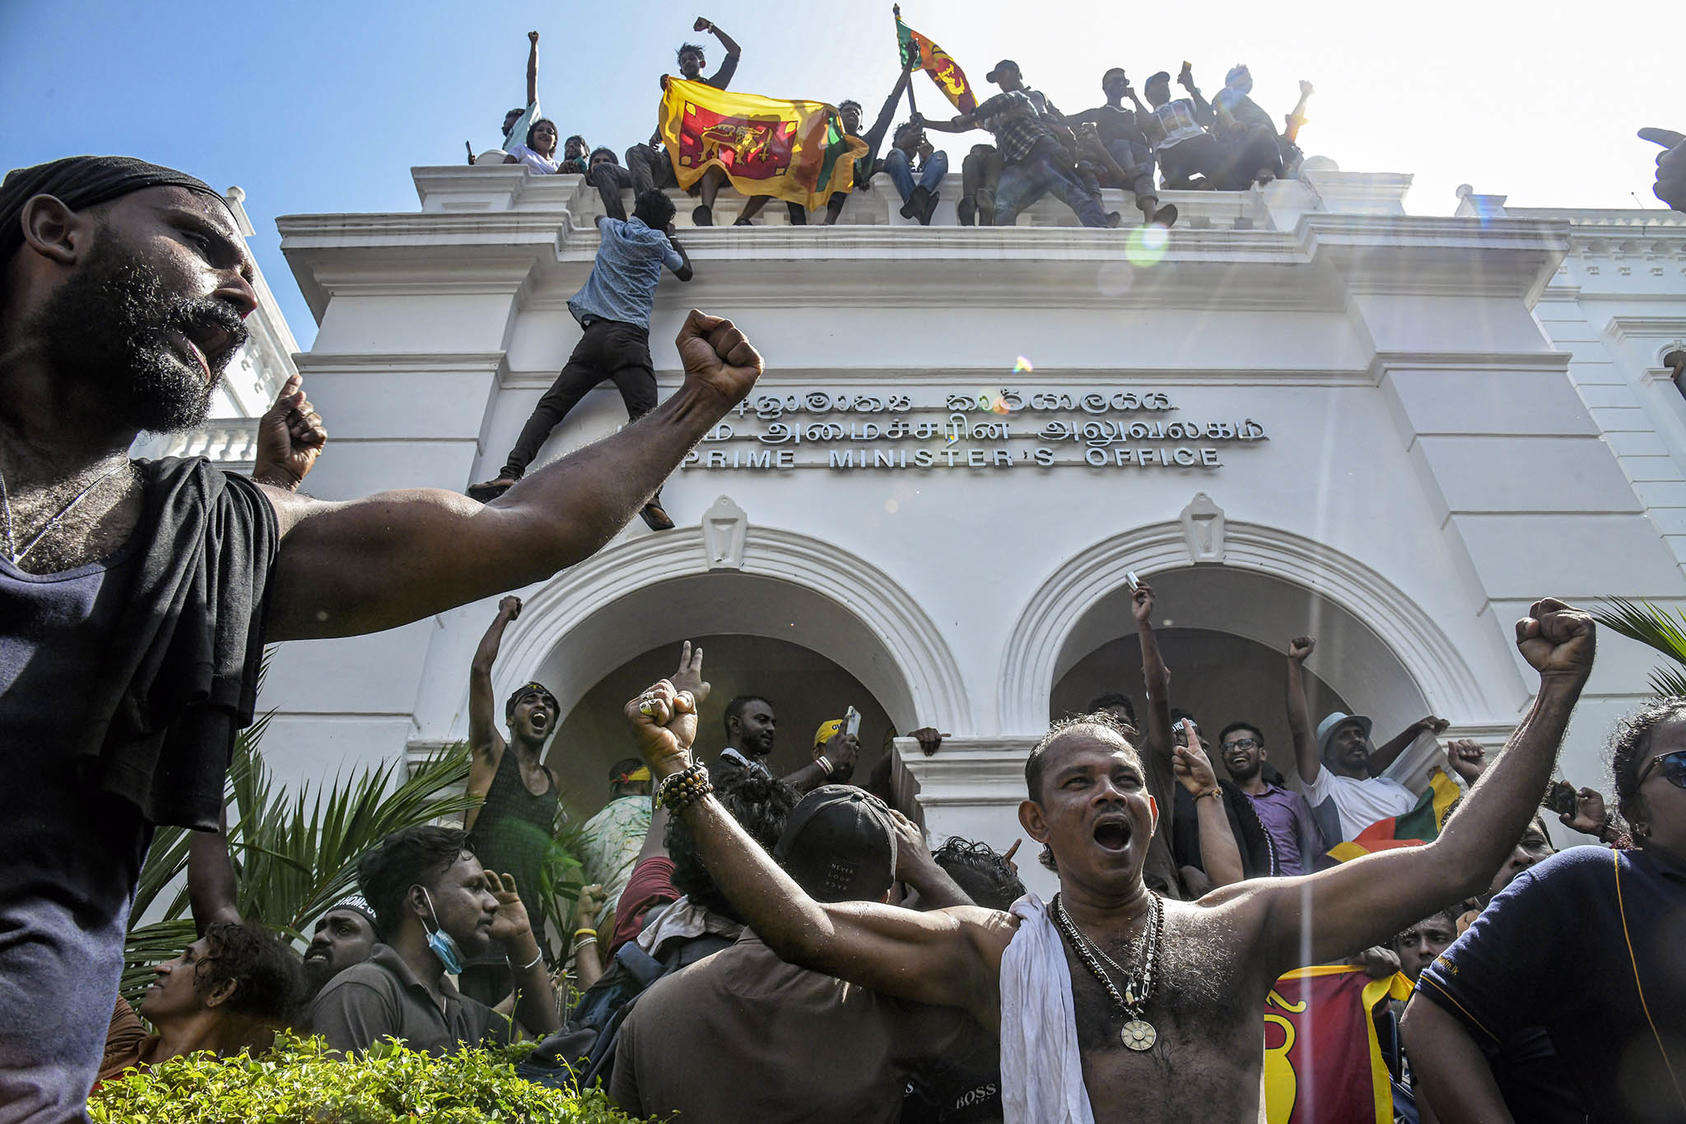 Protesters celebrate after taking over the prime minister’s office in Colombo, Sri Lanka, on July 13, 2022. (Atul Loke/The New York Times)